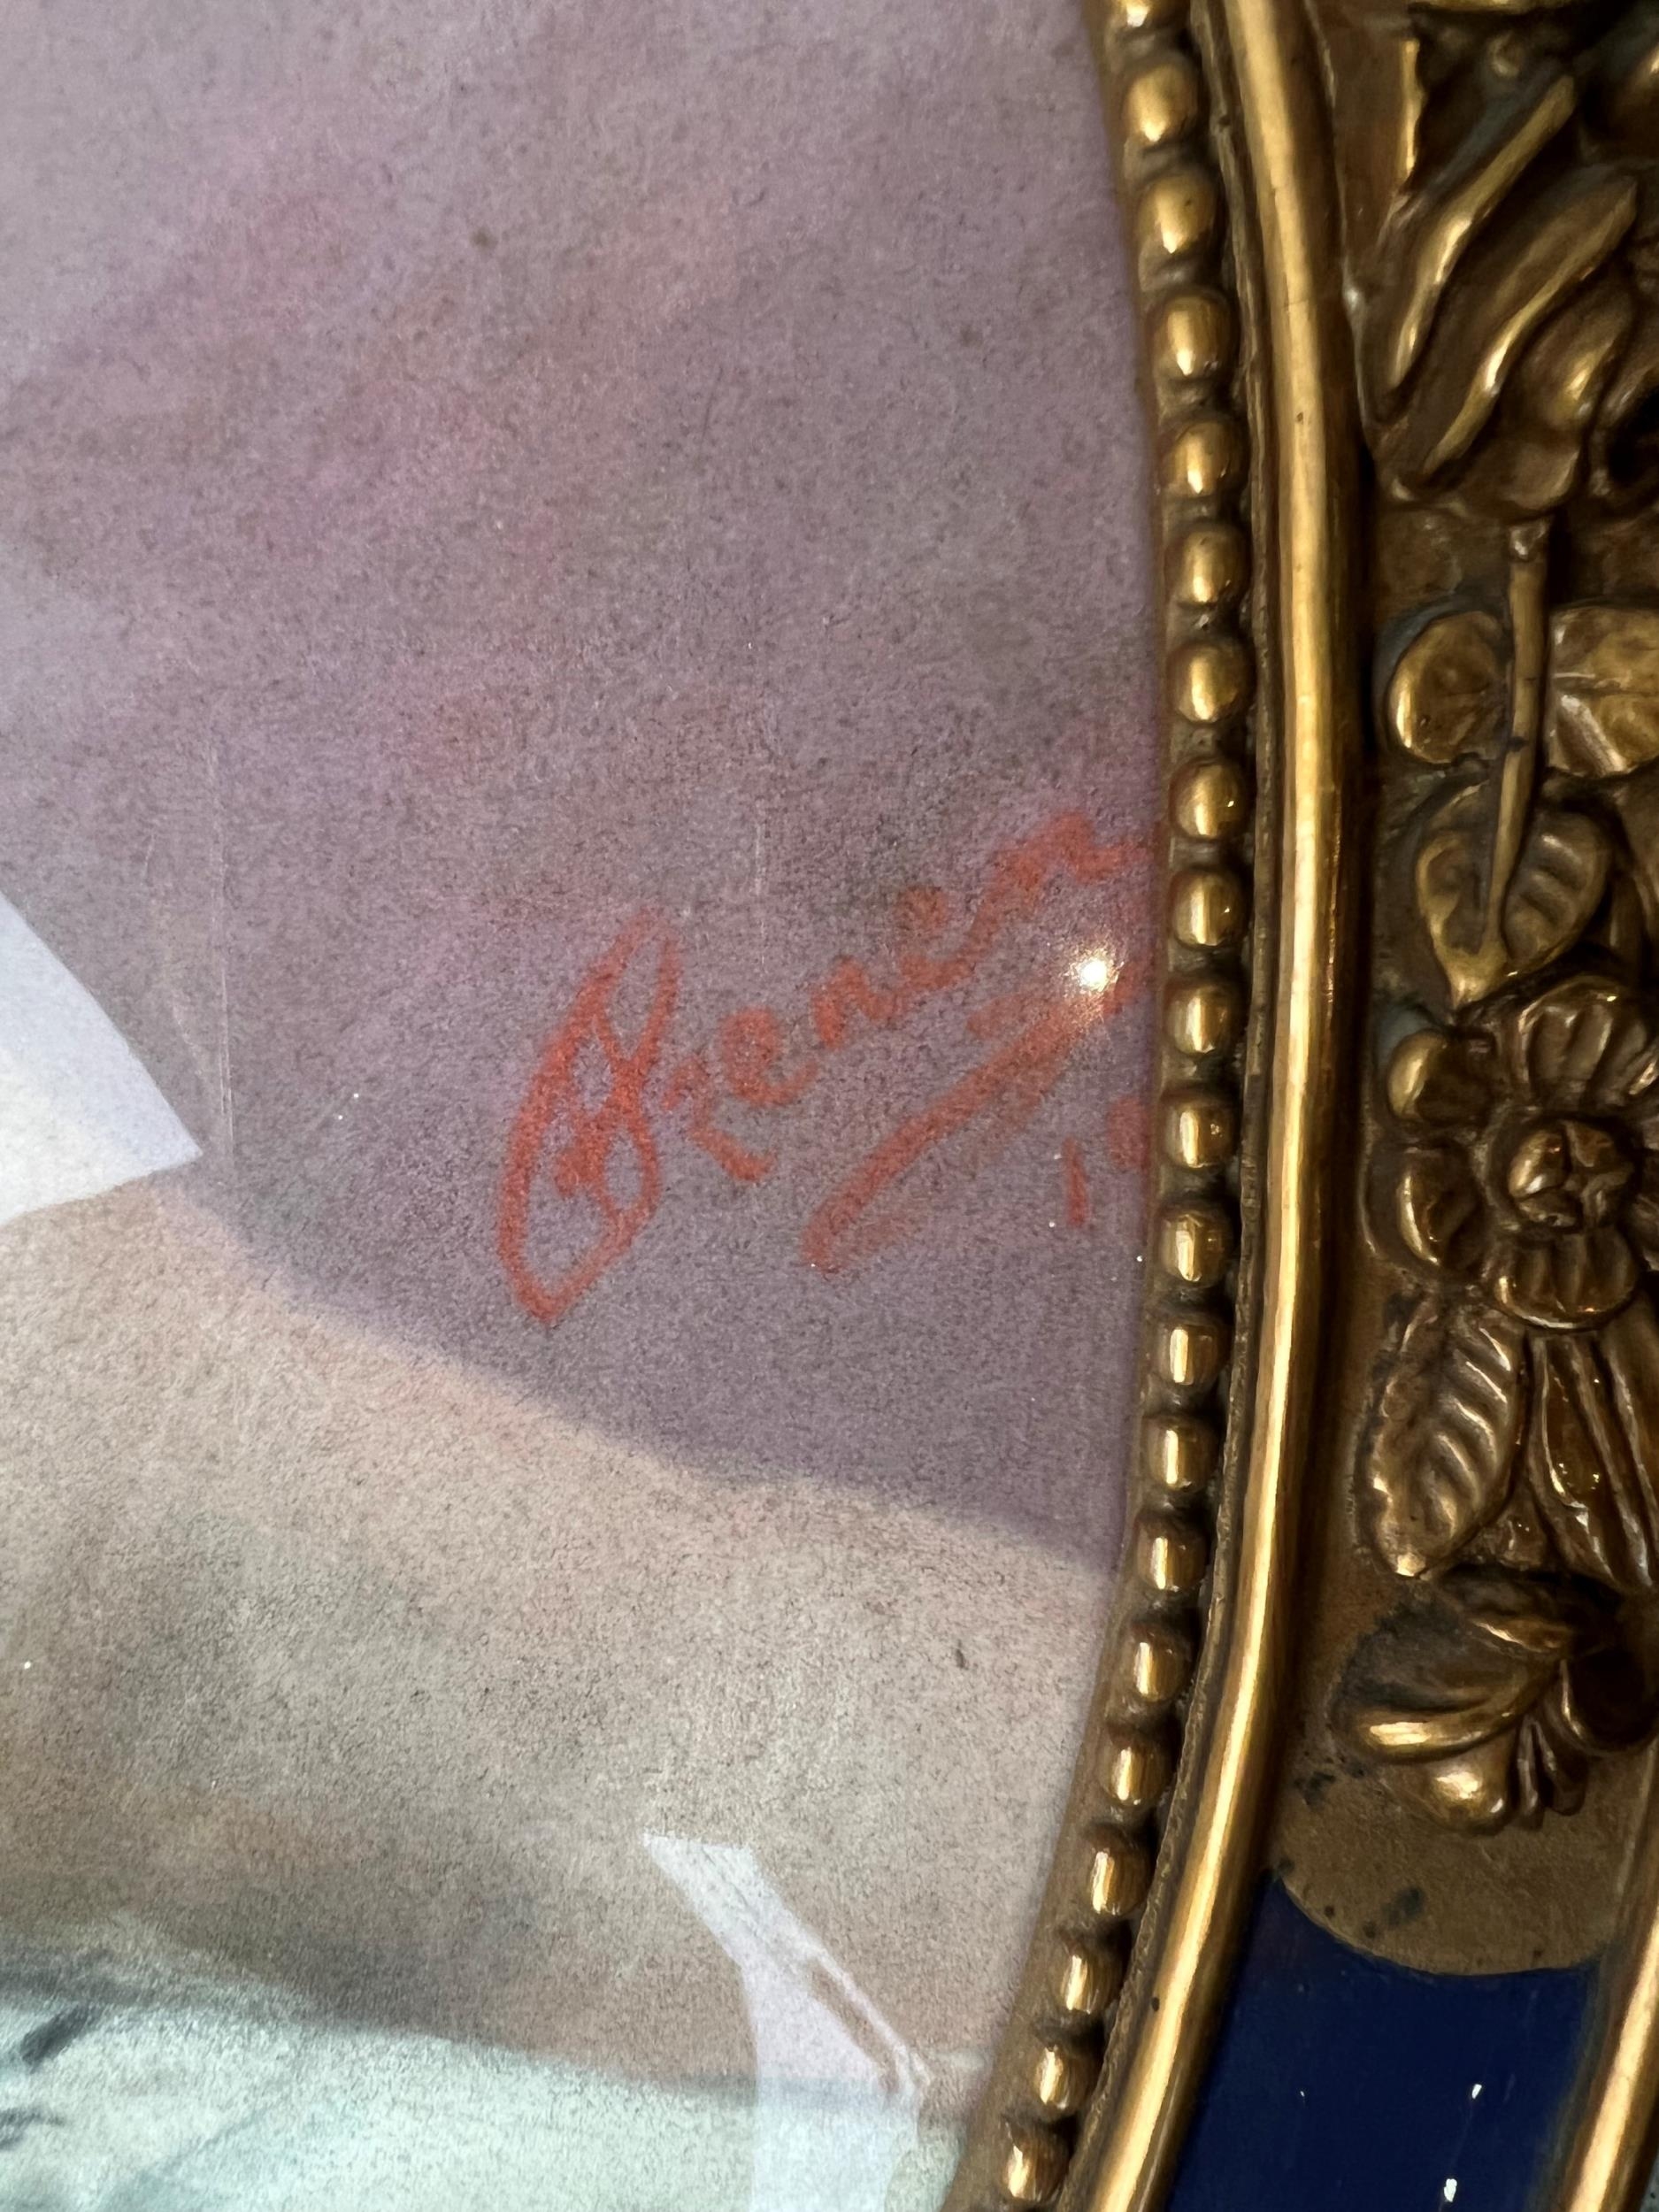 A 20TH CENTURY OVAL PASTEL PORTRAIT OF A YOUNG GIRL Indistinctly signed lower right, held in a - Image 4 of 5